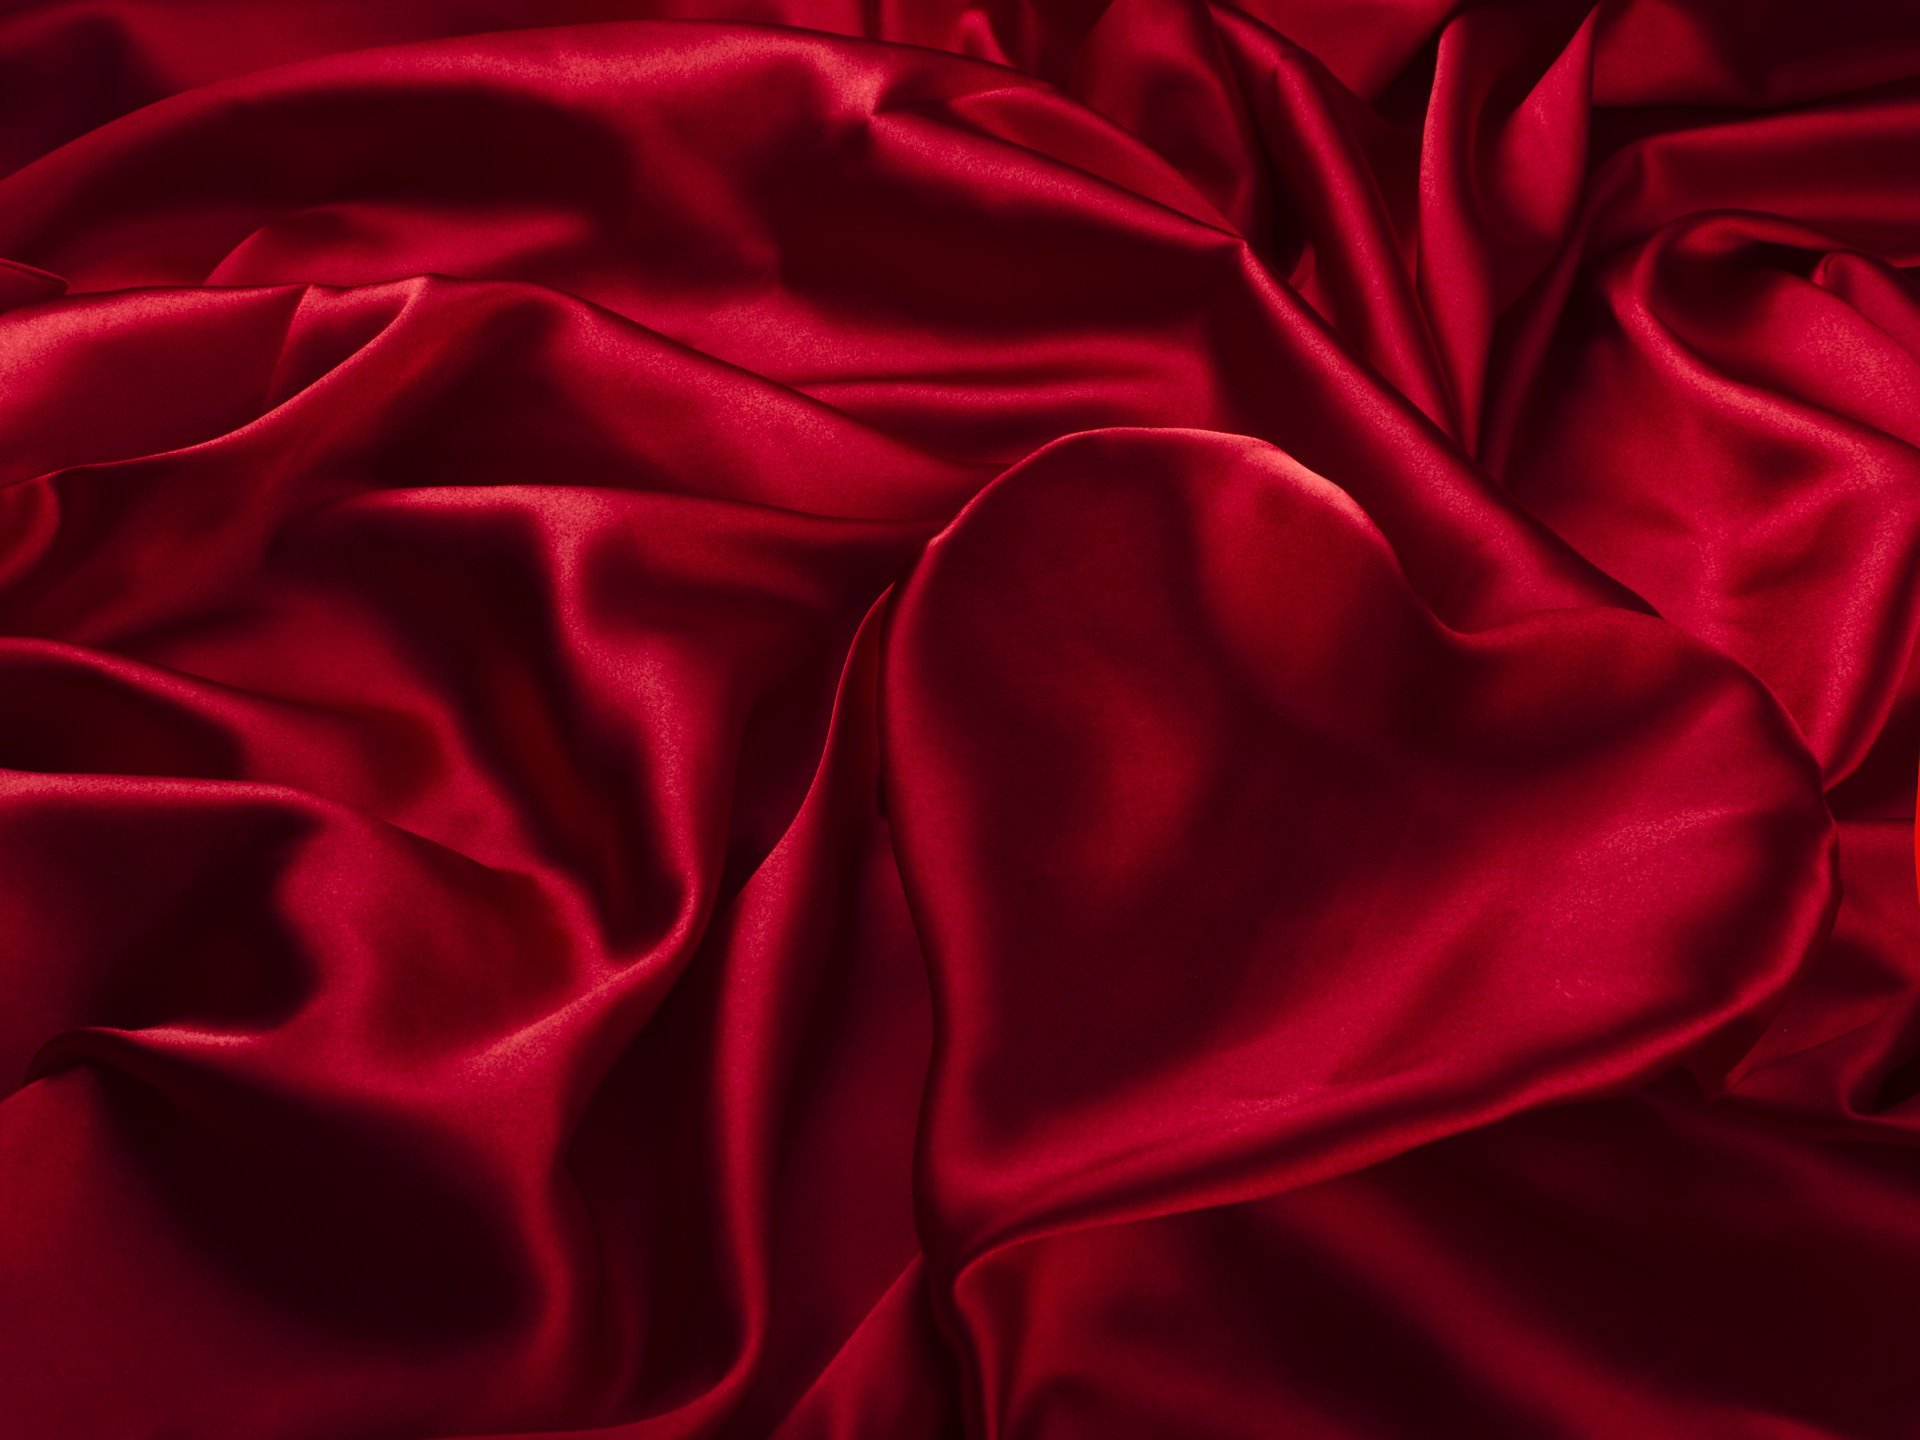 Heart made of red silk fabric with pleats